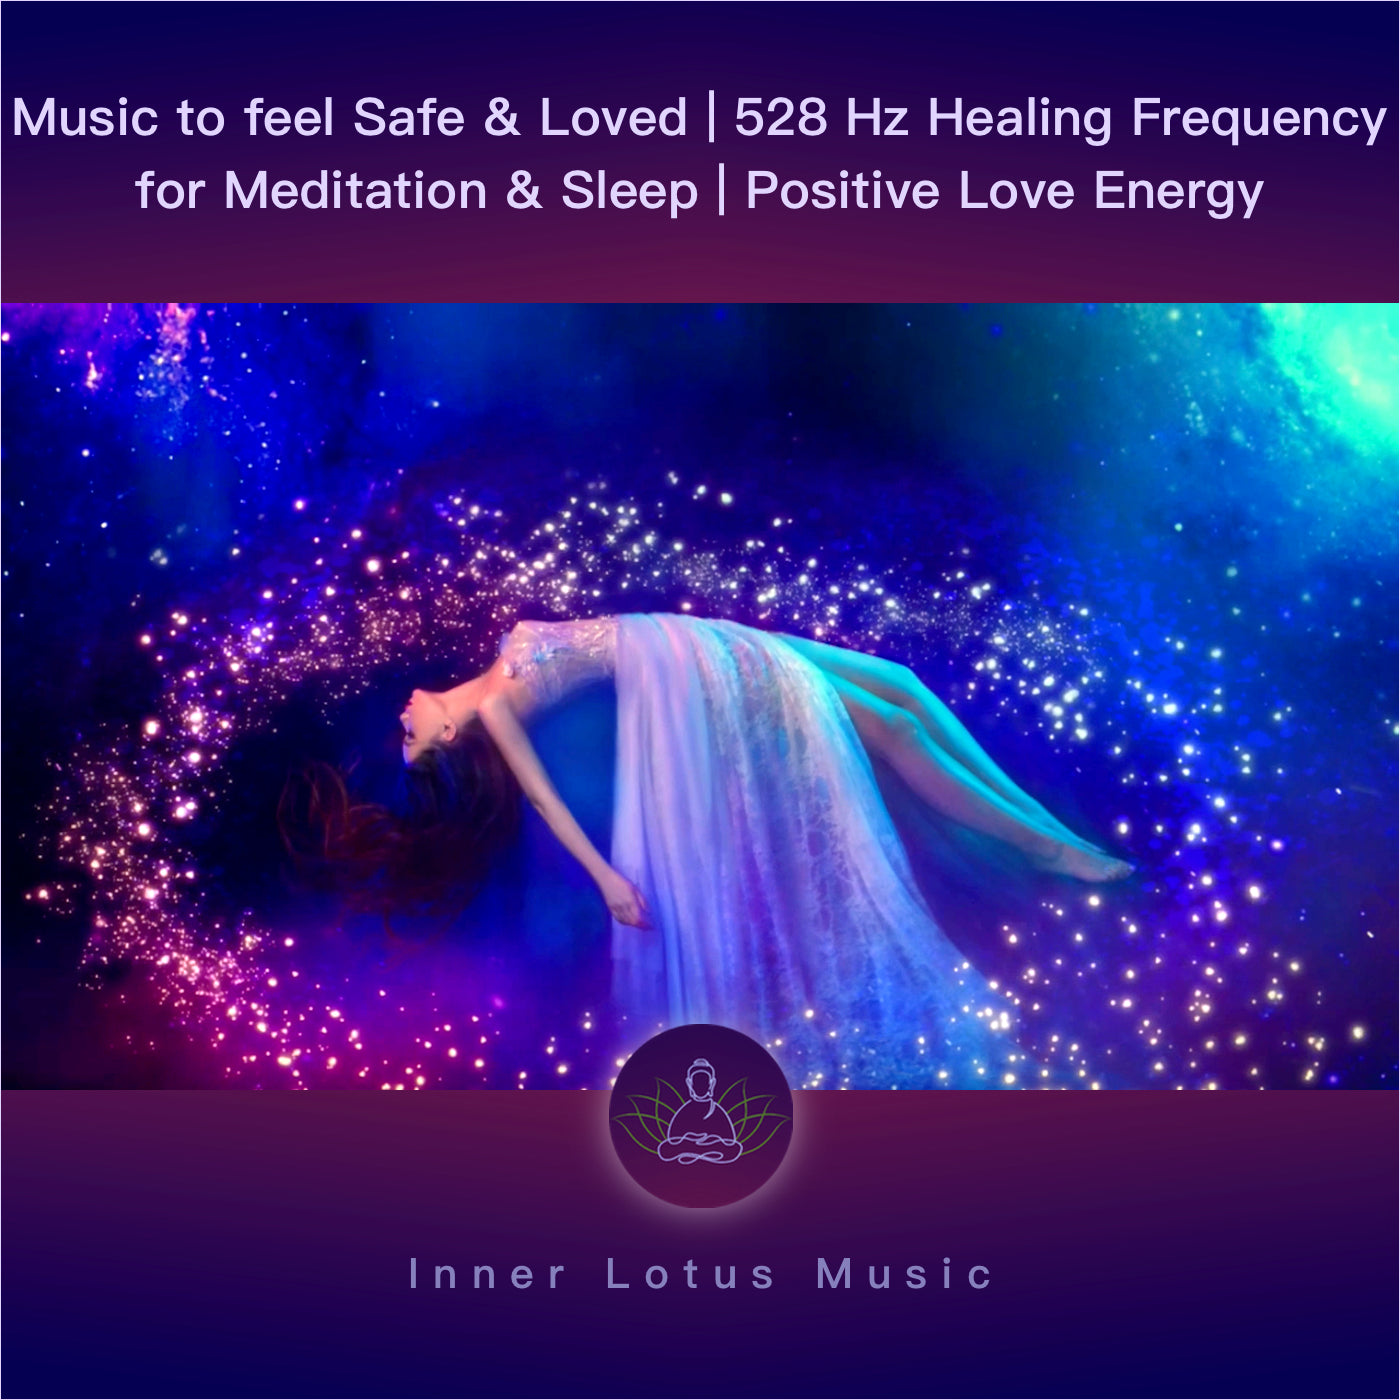 Music to feel Safe & Loved | 528 Hz Healing Frequency for Meditation & Sleep | Positive Love Energy